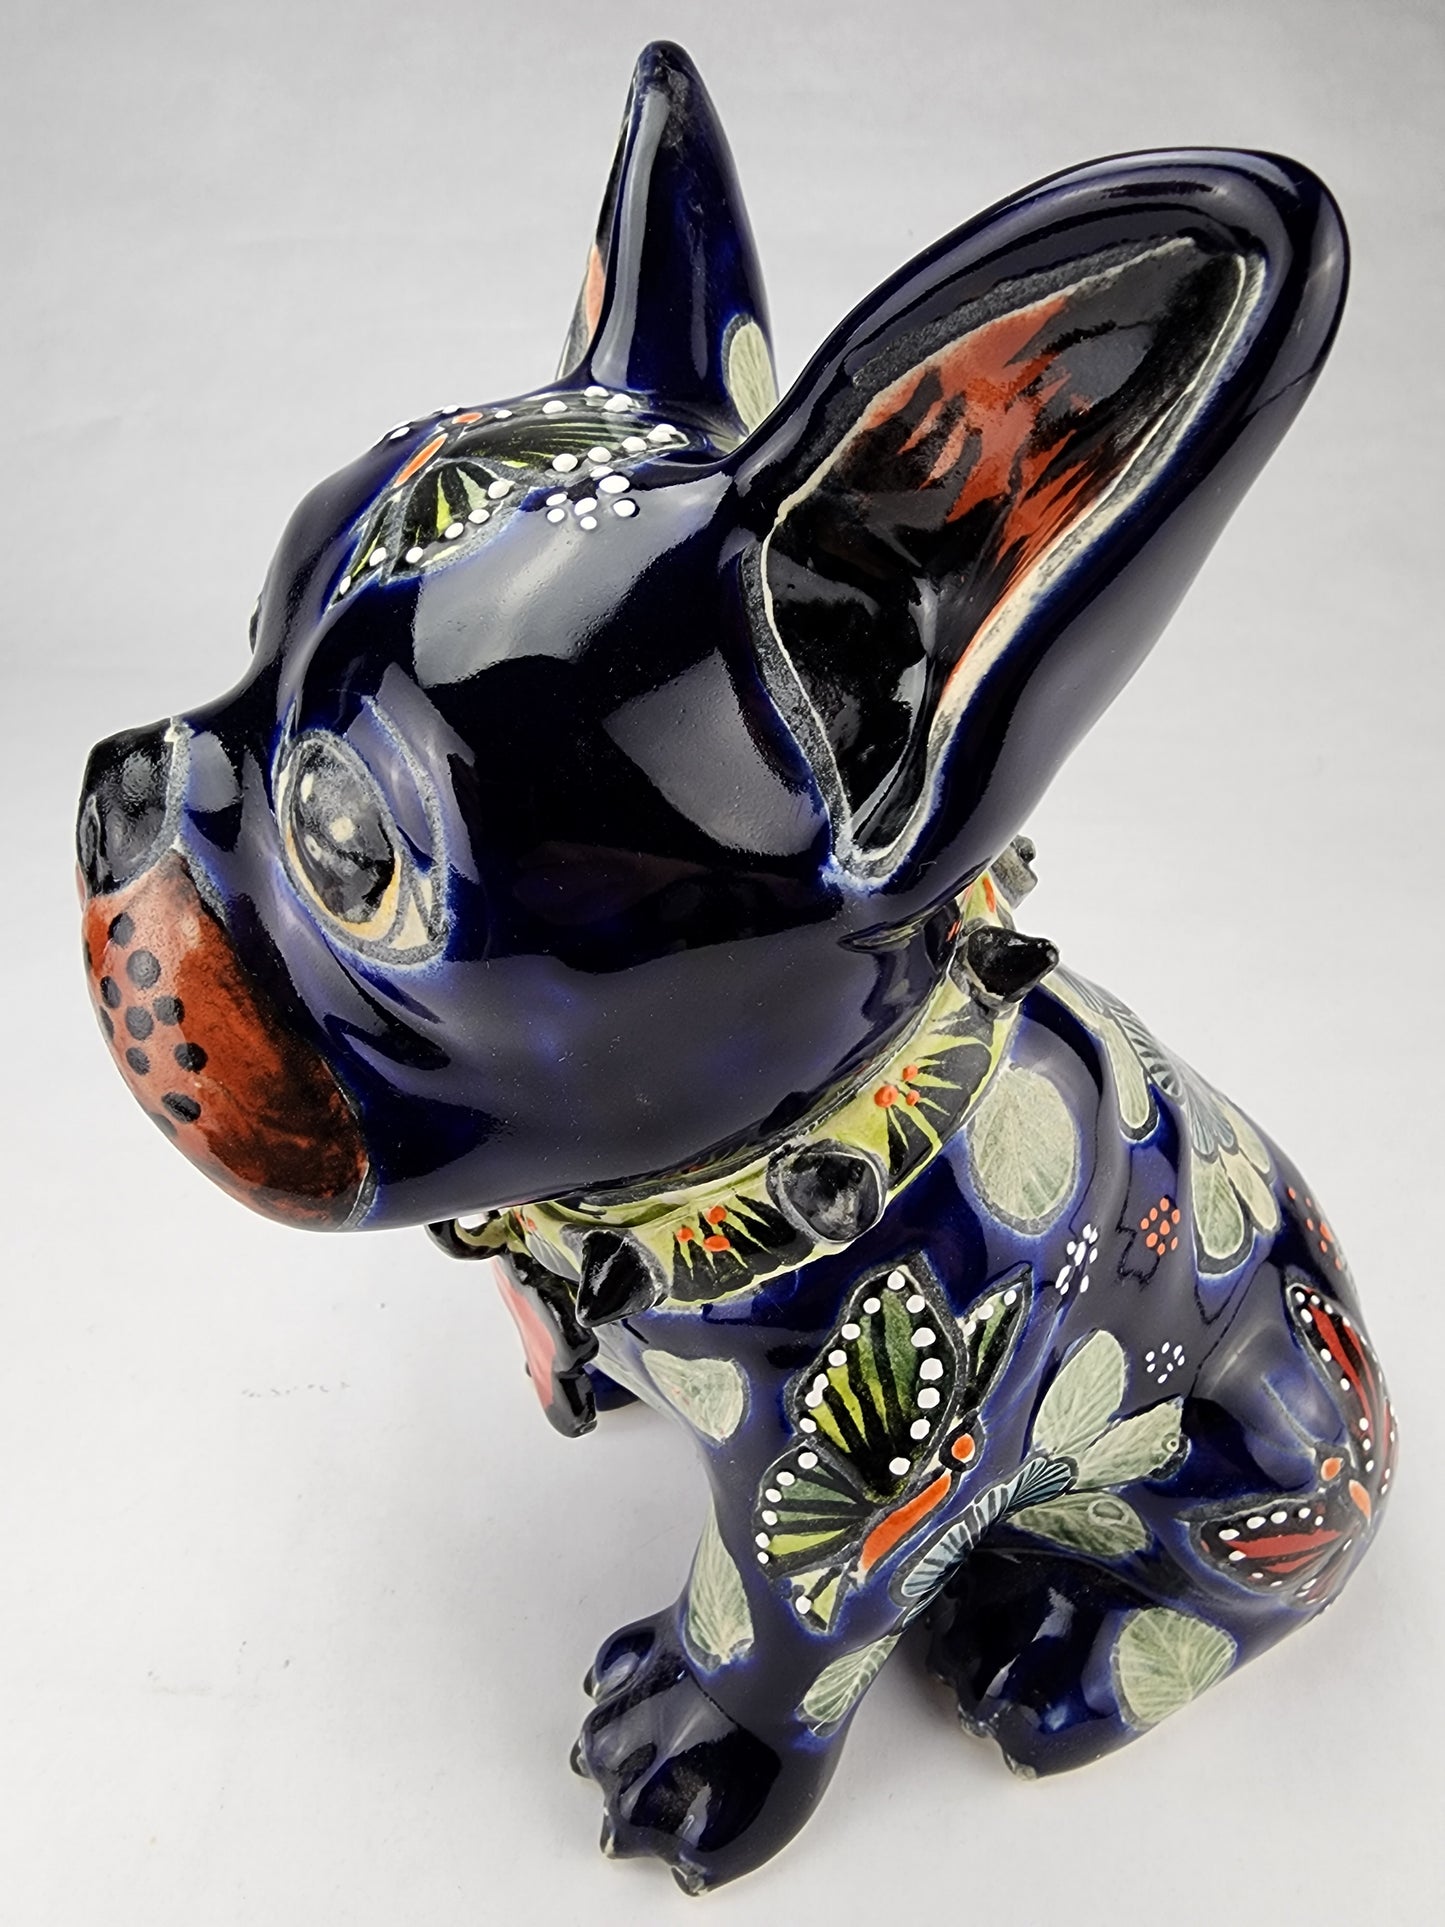 Frenchie Bulldog Hand Painted Talavera Mexican Pottery BR